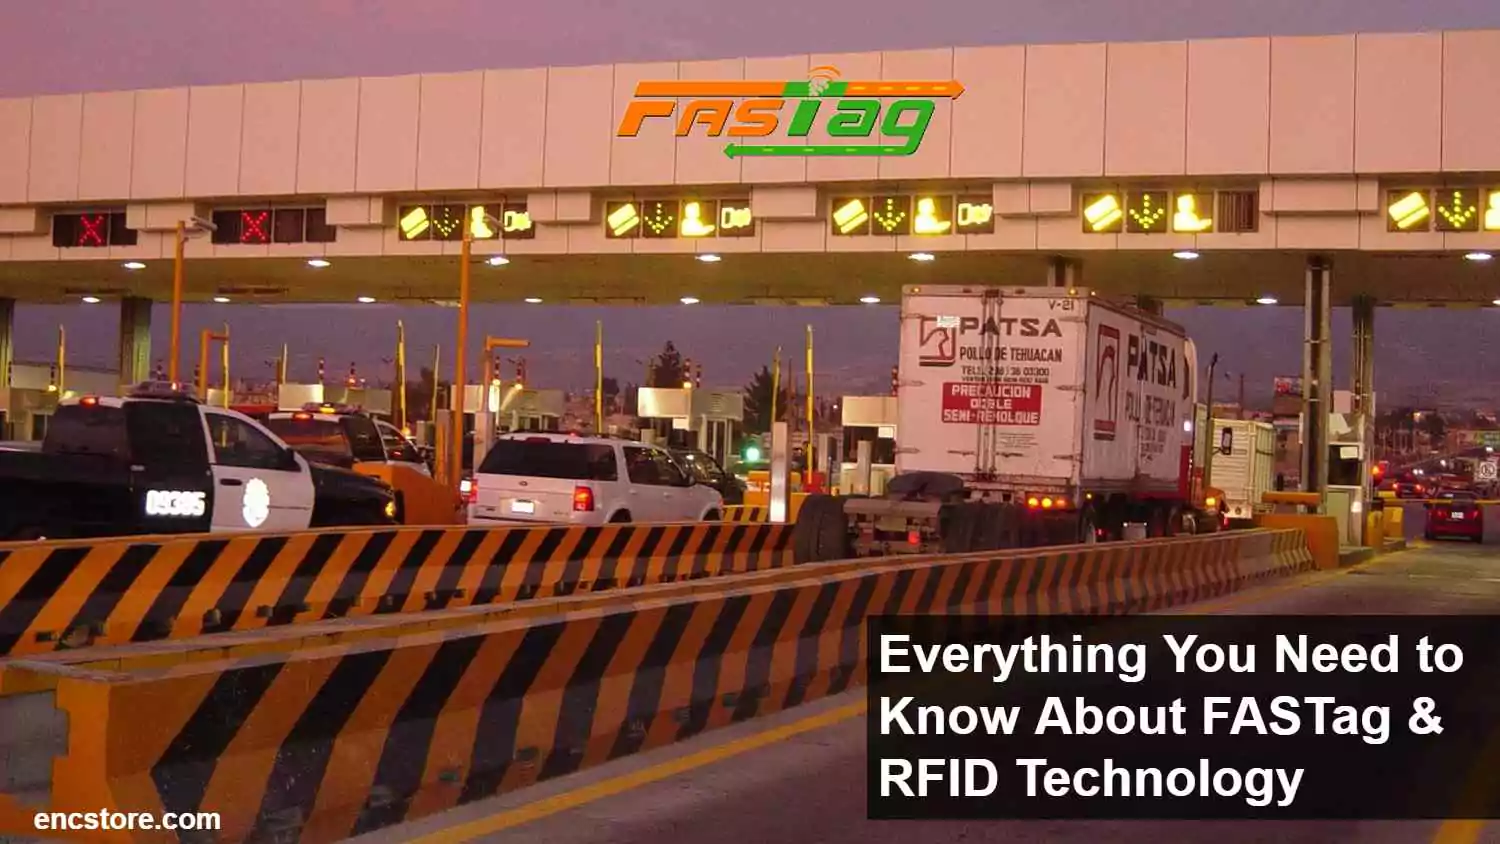 FASTag and RFID Technology